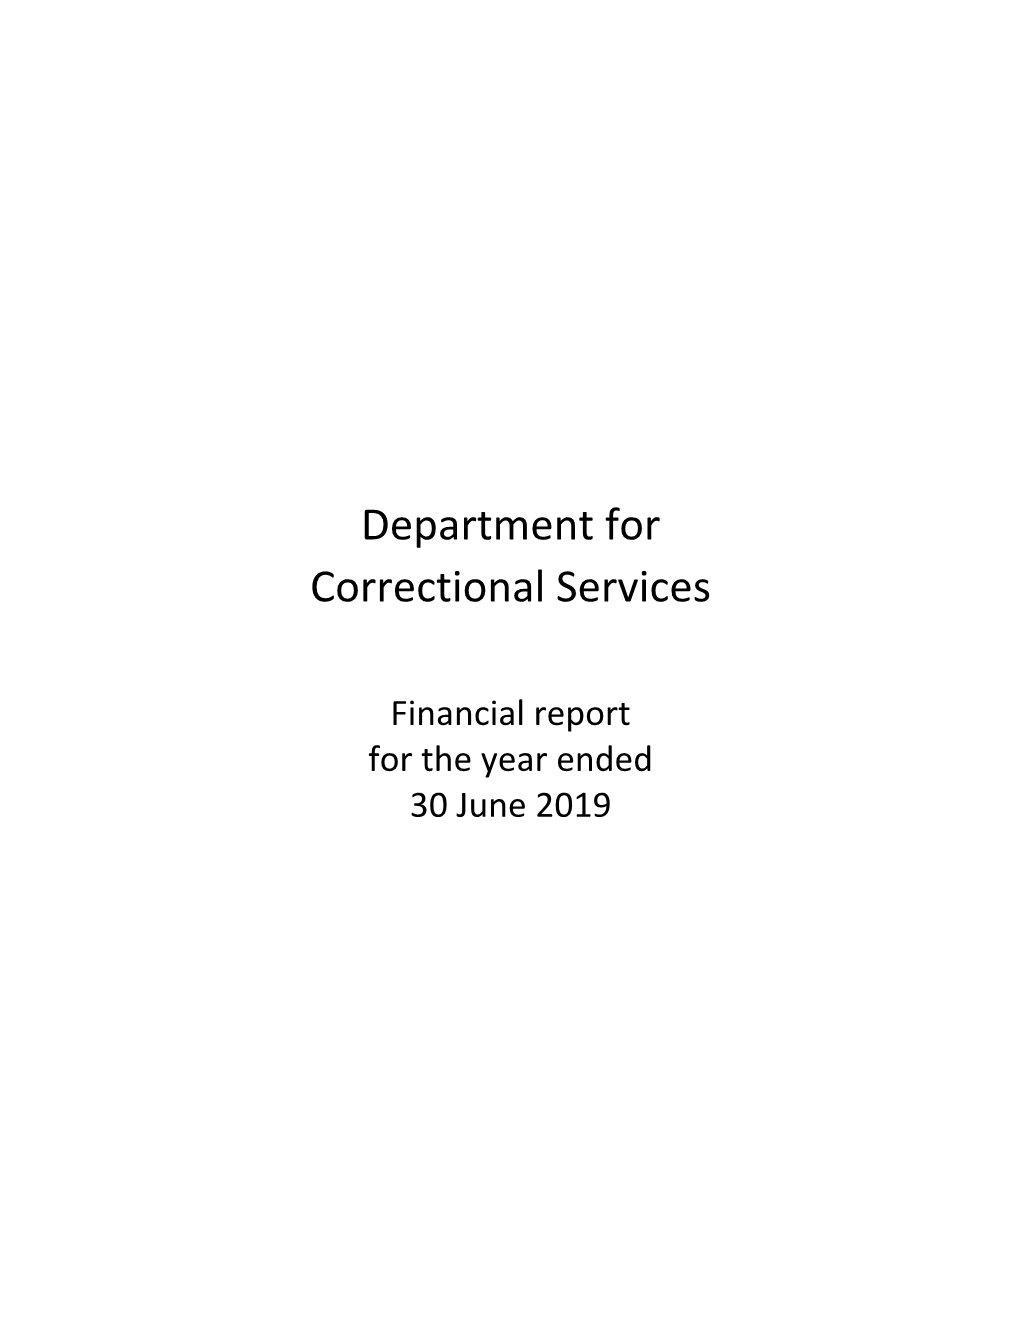 Department for Correctional Services